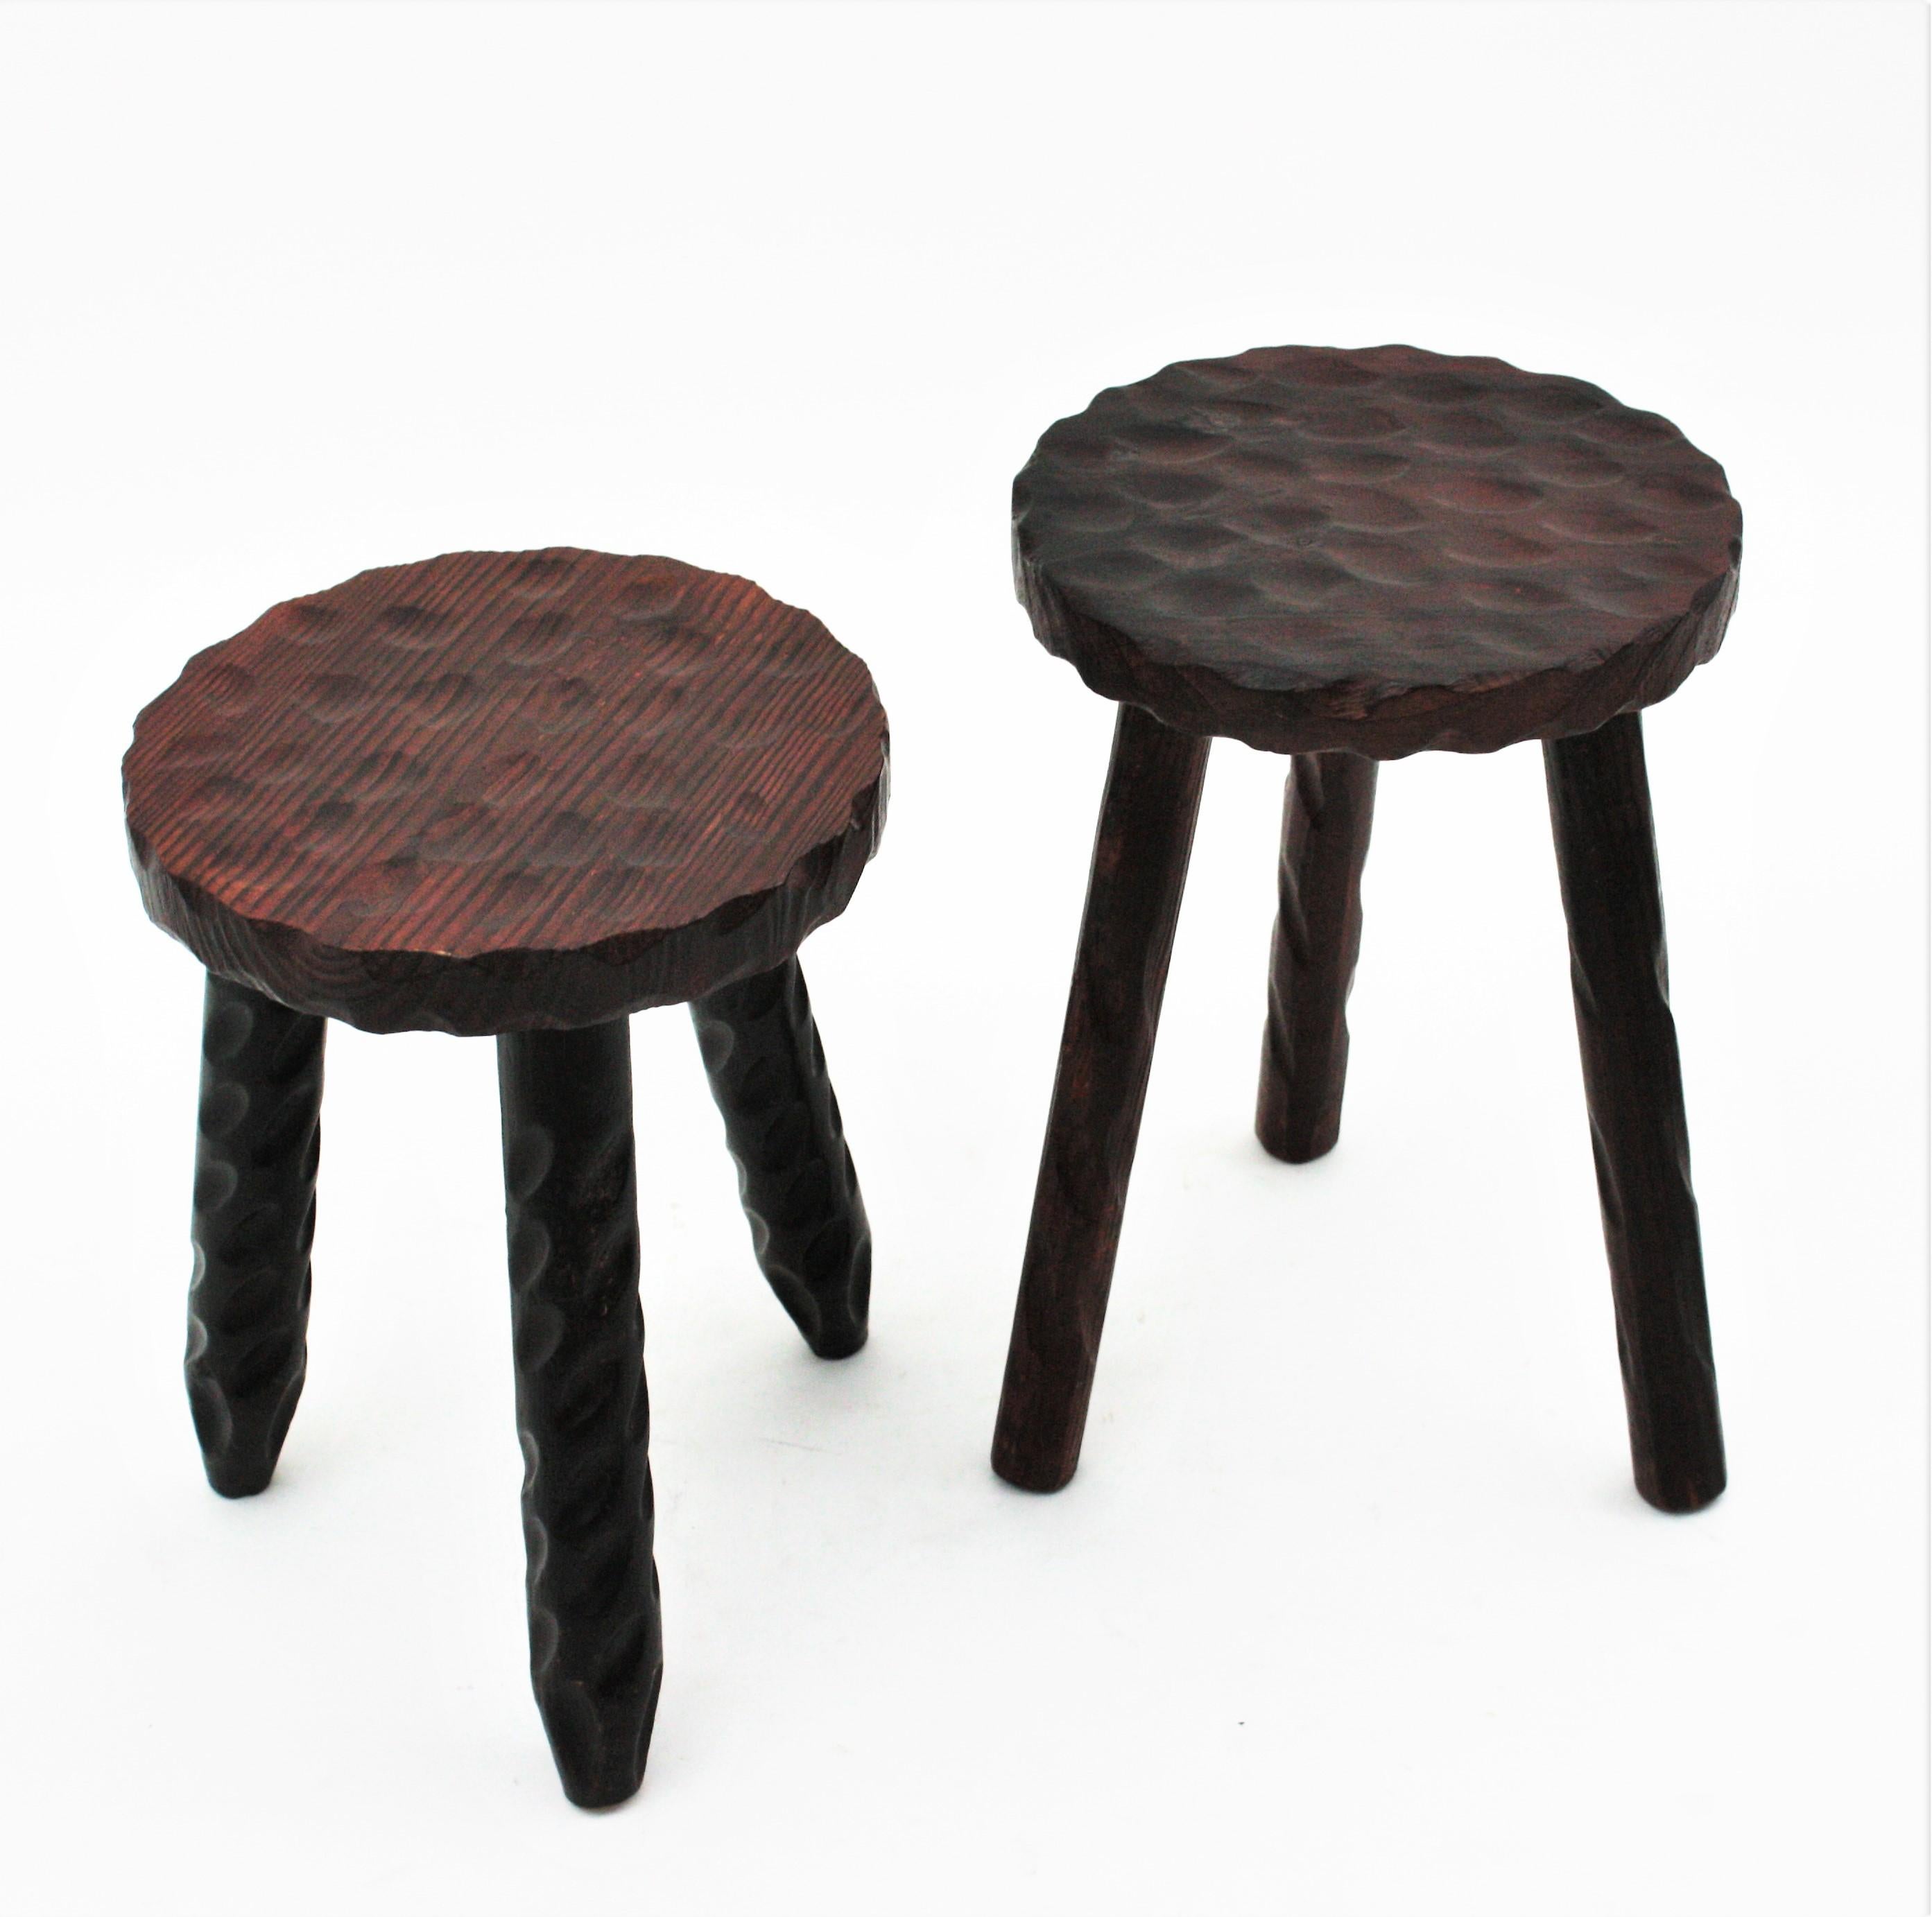 20th Century Pair of Spanish Colonial Tripod Stools in Carved Wood, 1940s For Sale